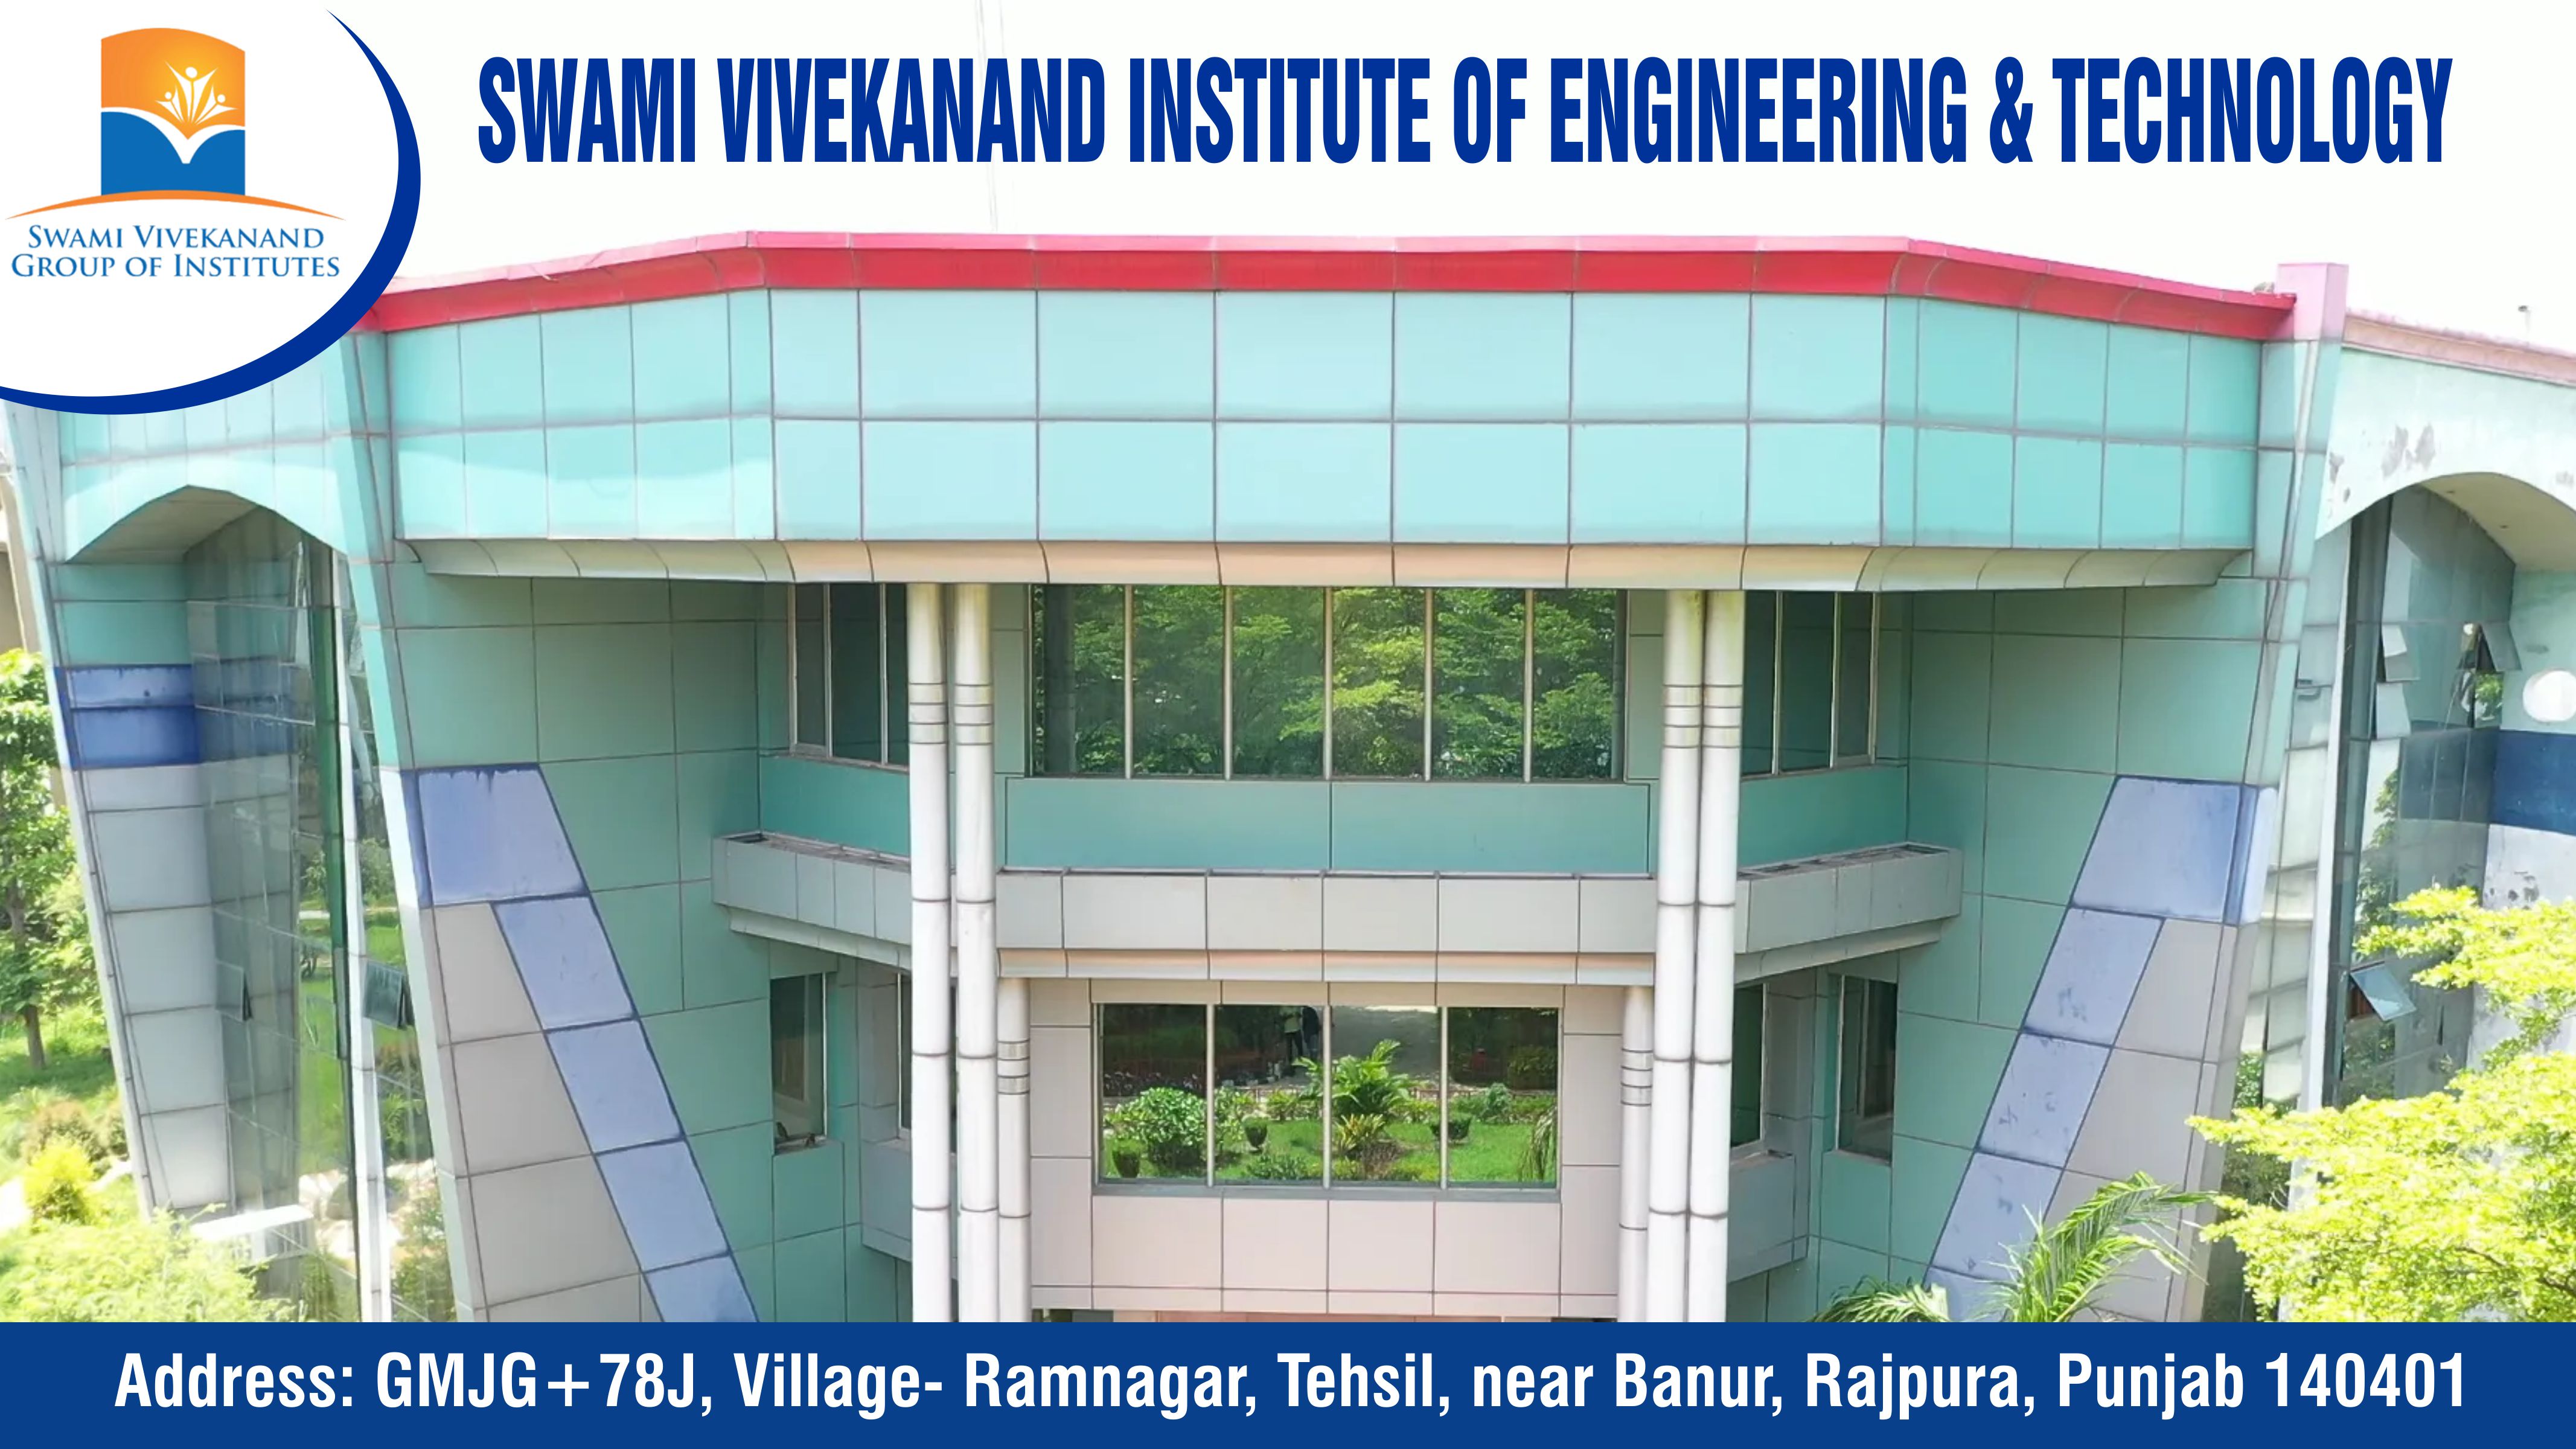 Out Side View of Swami Vivekanand Institute of Engineering and Technology - SVIET